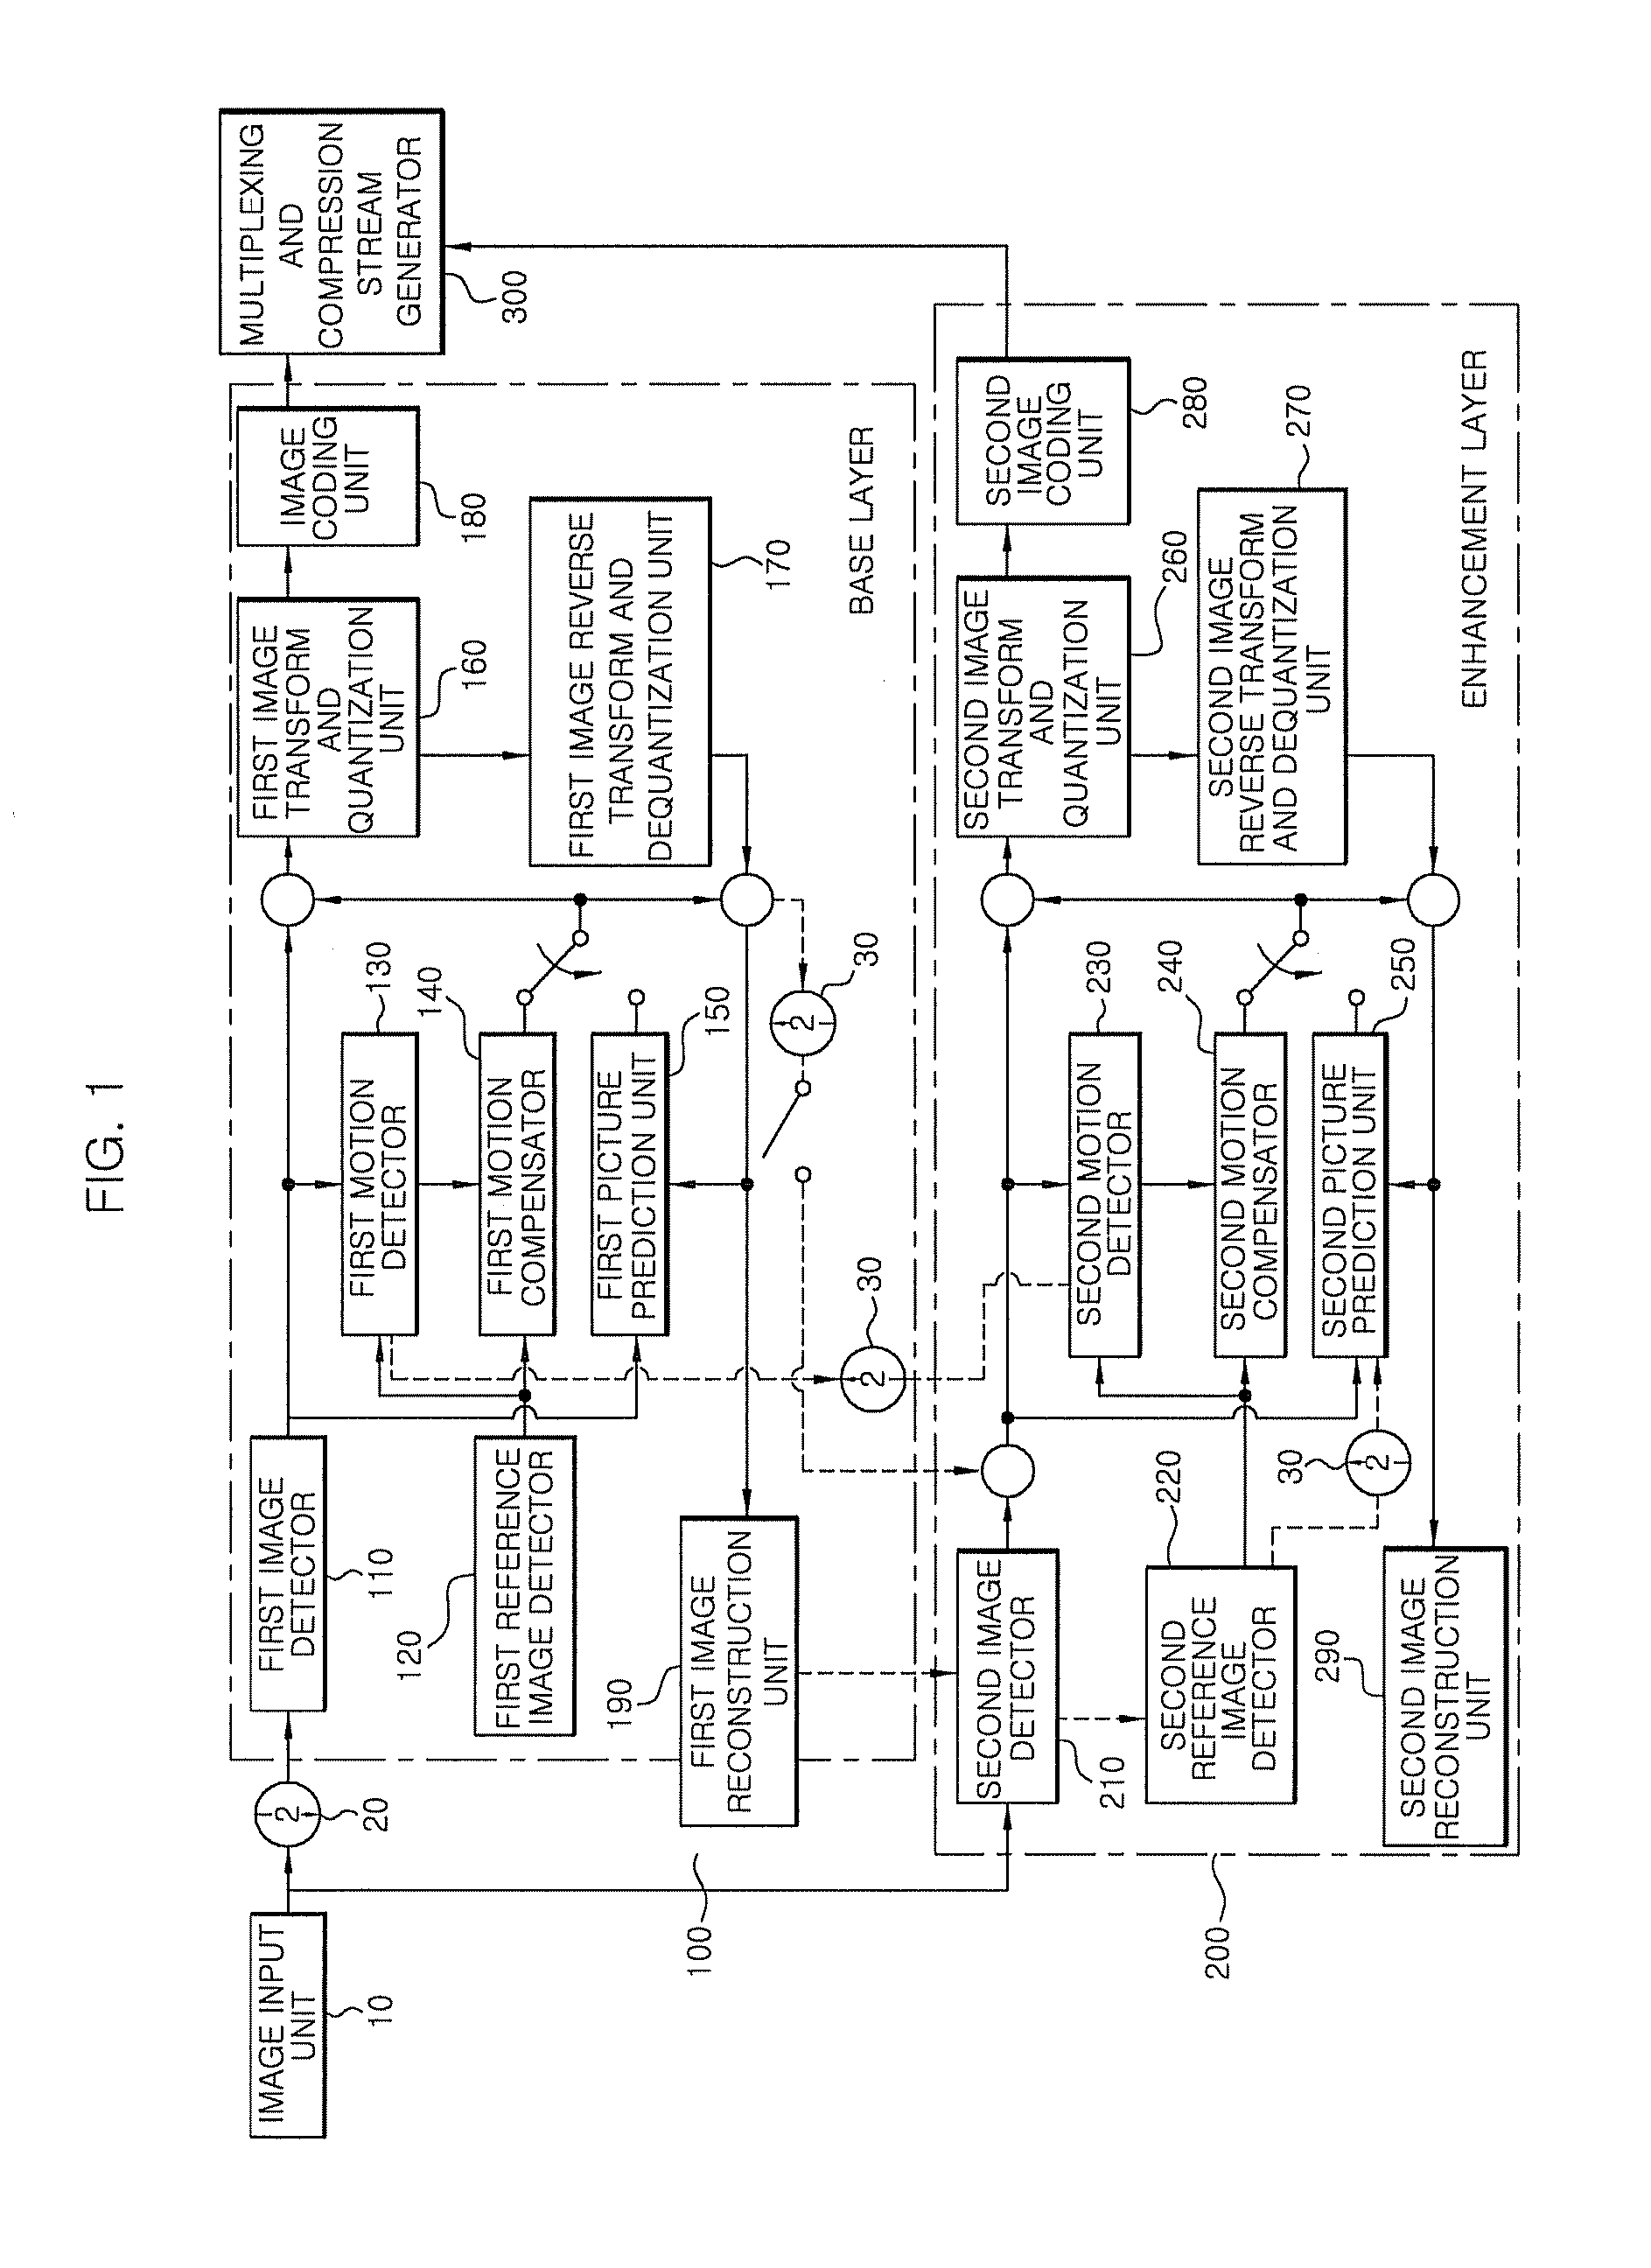 Method of fast mode decision of enhancement layer using rate-distortion cost in scalable video coding (SVC) encoder and apparatus thereof